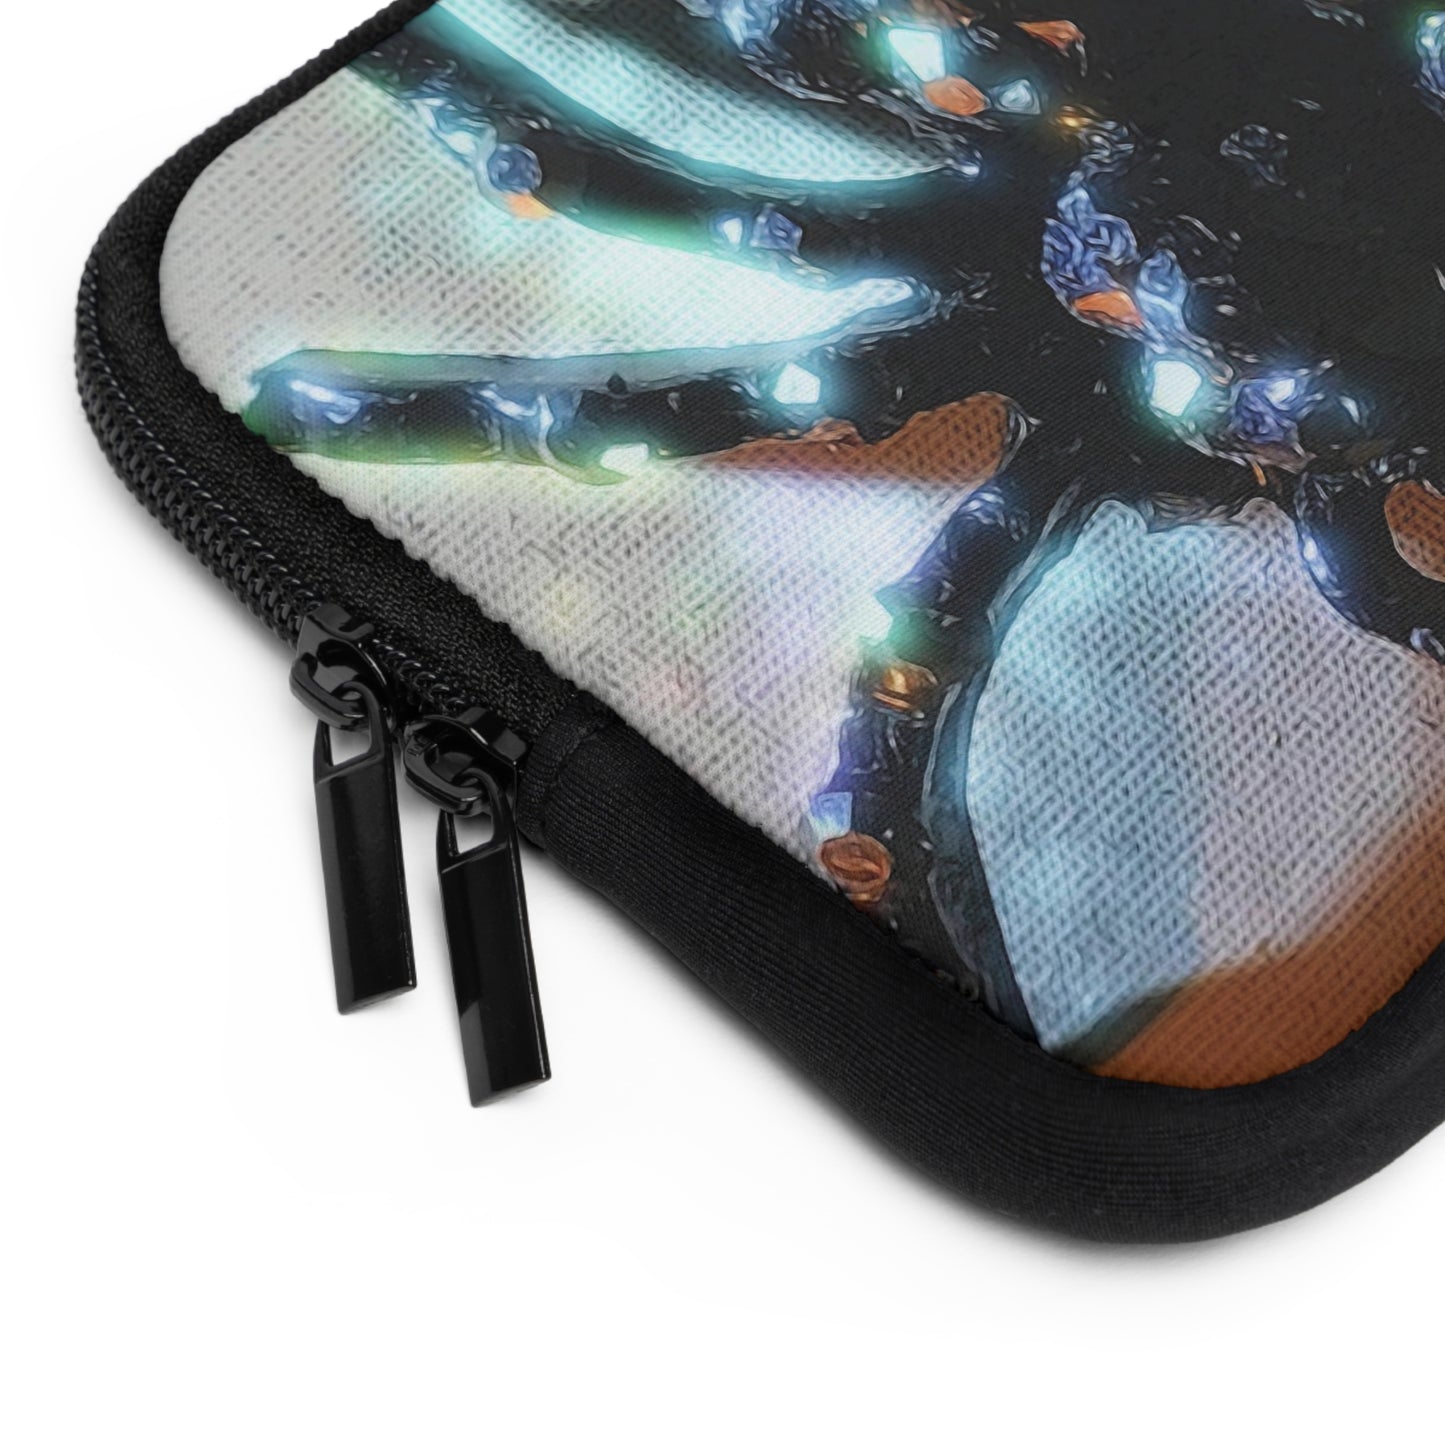 Stay Sparkly Spider Laptop Sleeve